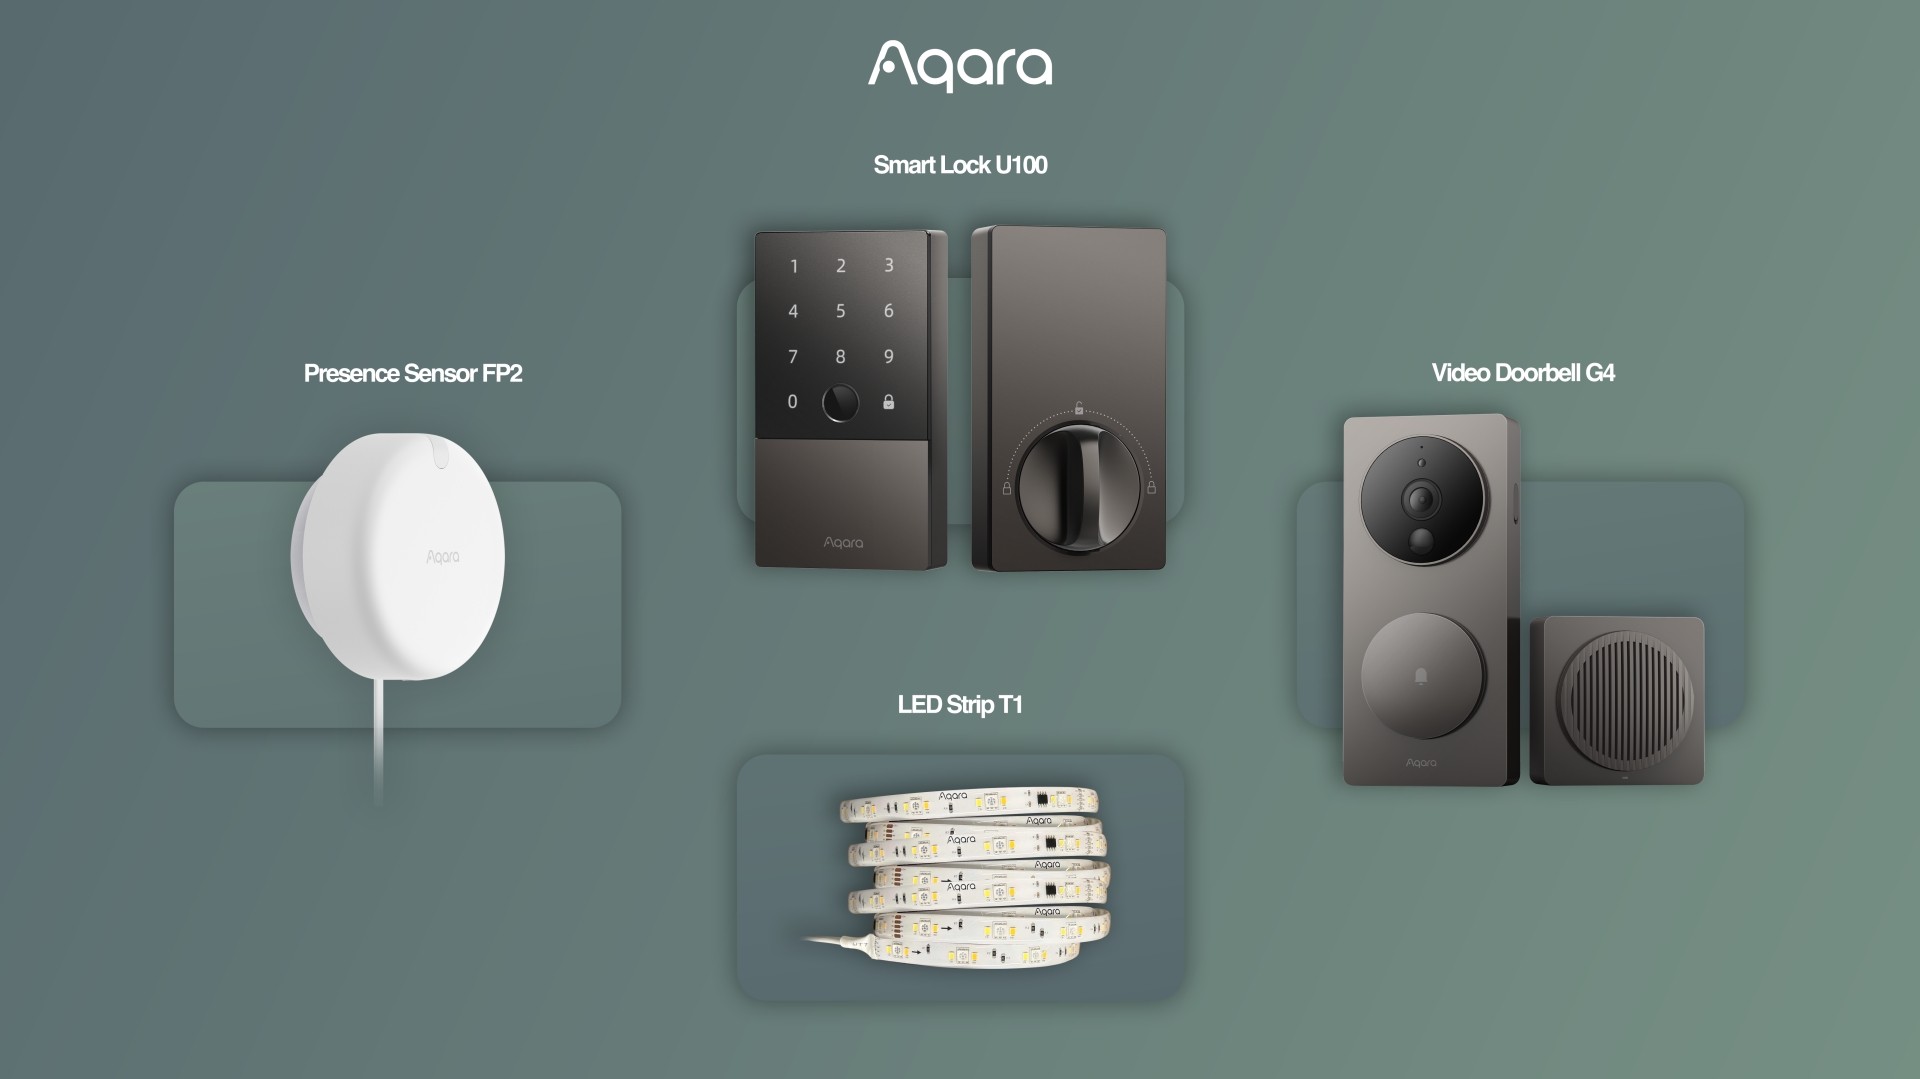 CES 2023: Aqara Announces Video Doorbell G4 With HomeKit Secure Video and Smart Lock U100 With Apple Home Key Support